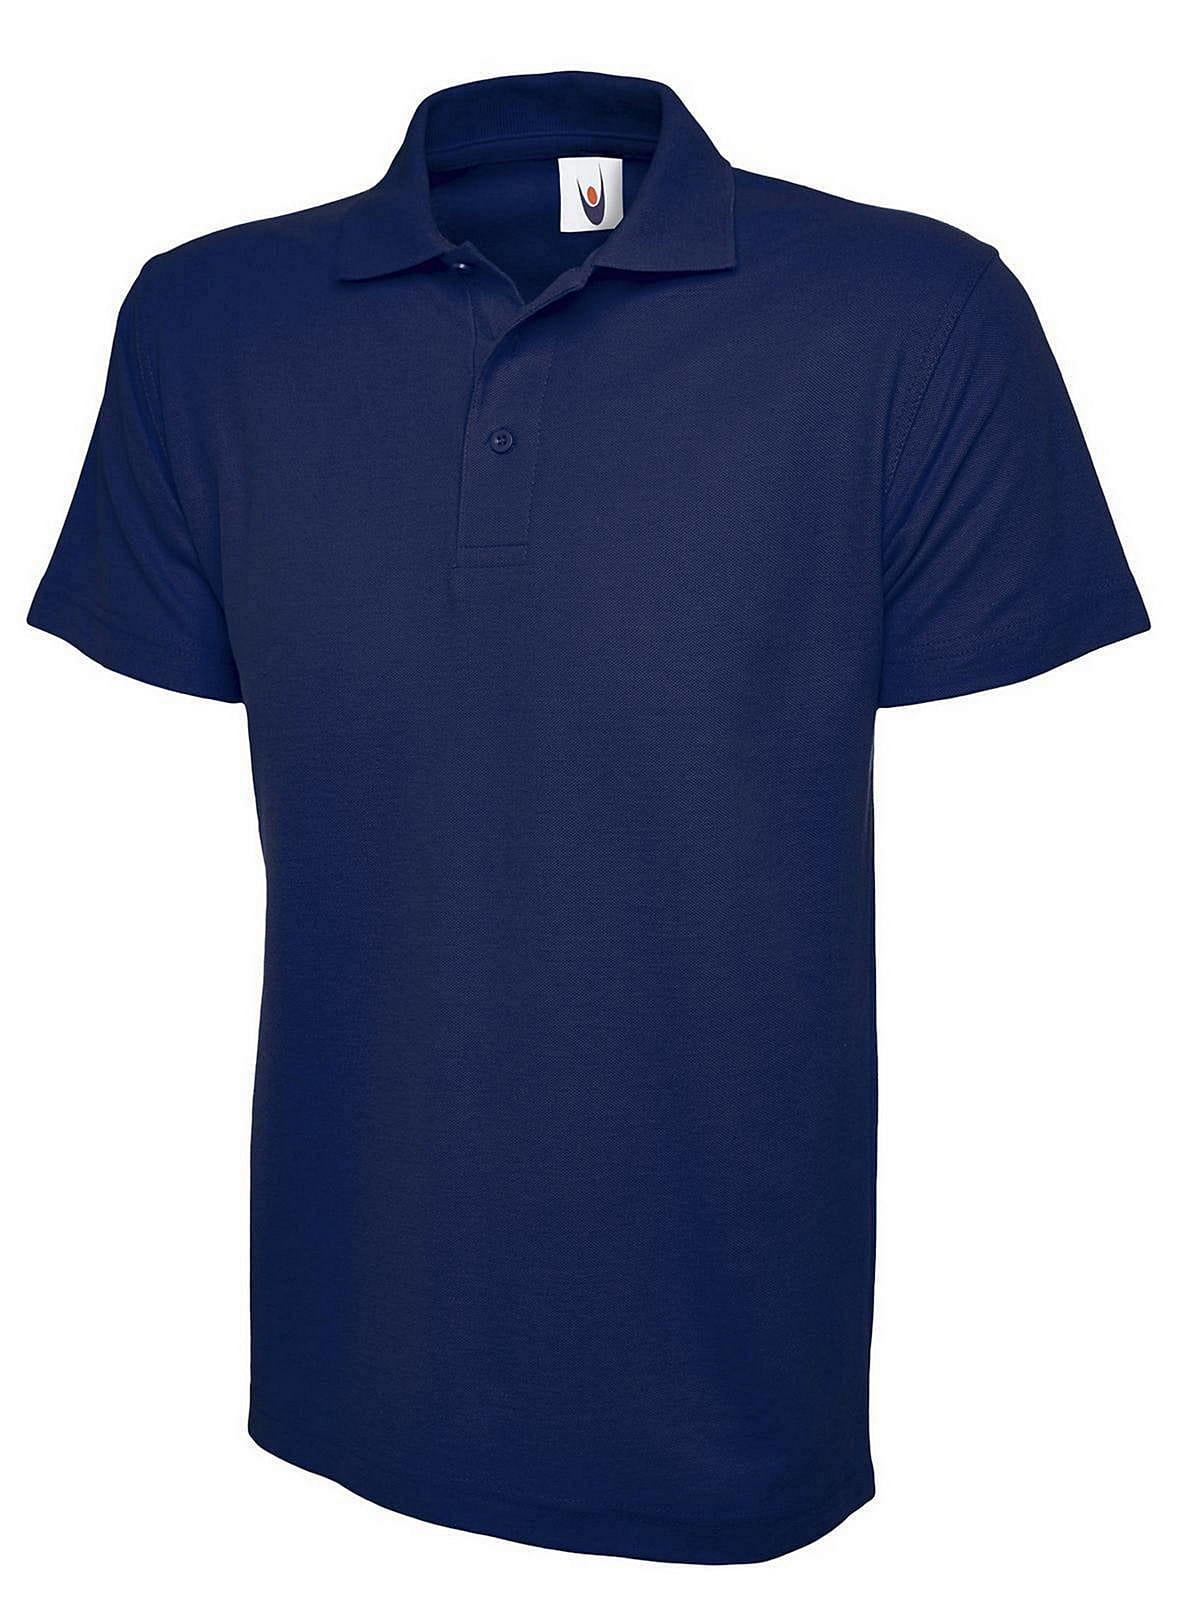 Uneek 220GSM Classic Polo Shirt in French Navy (Product Code: UC101)